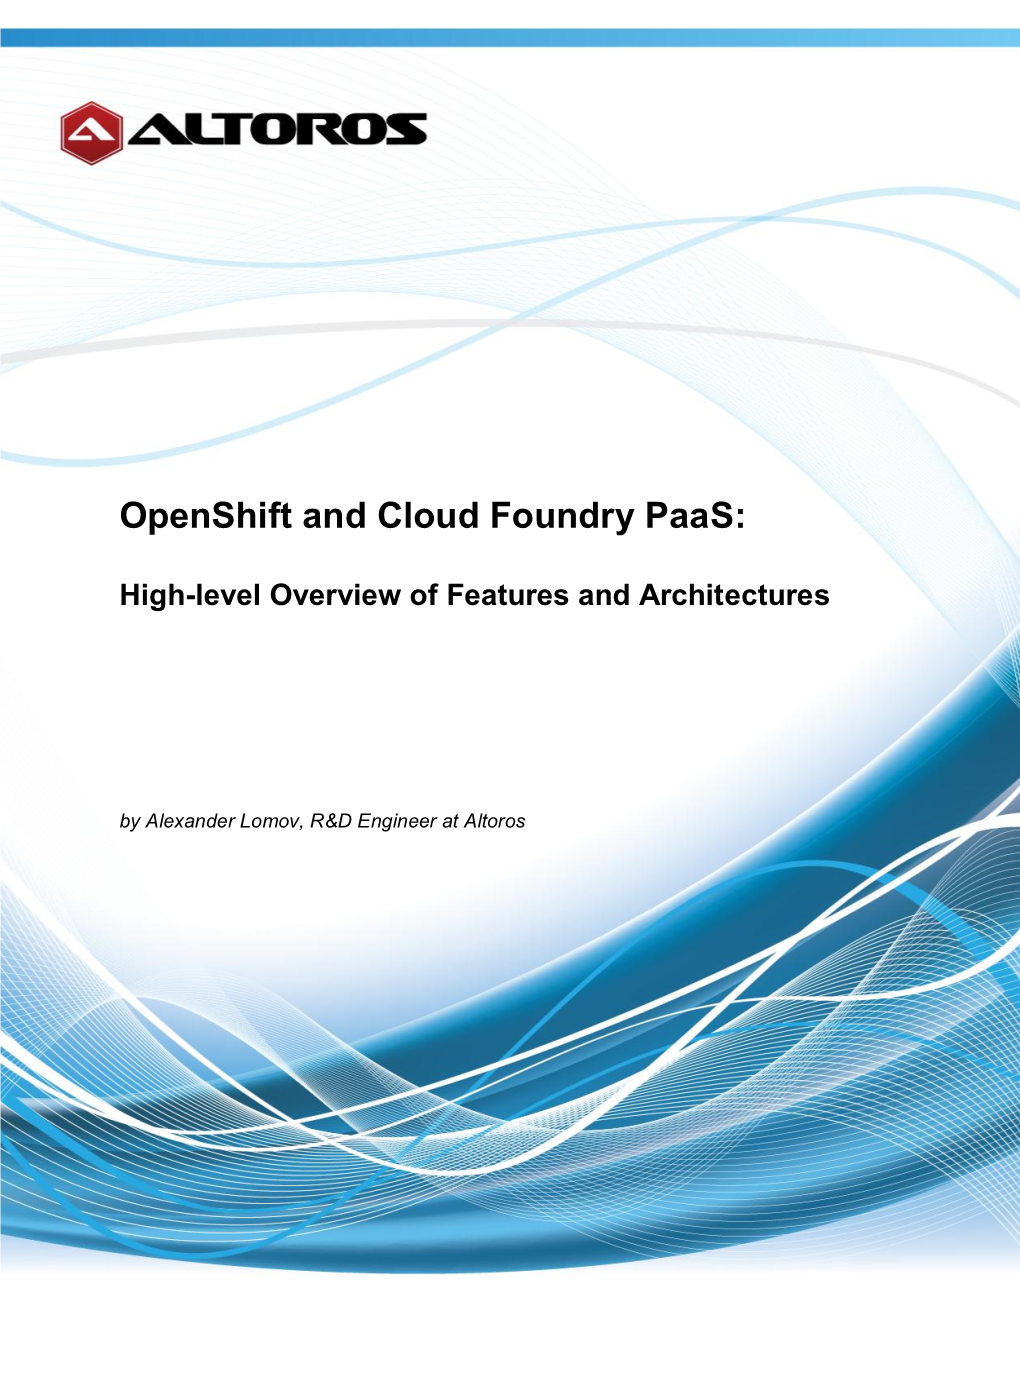 Openshift and Cloud Foundry Paas